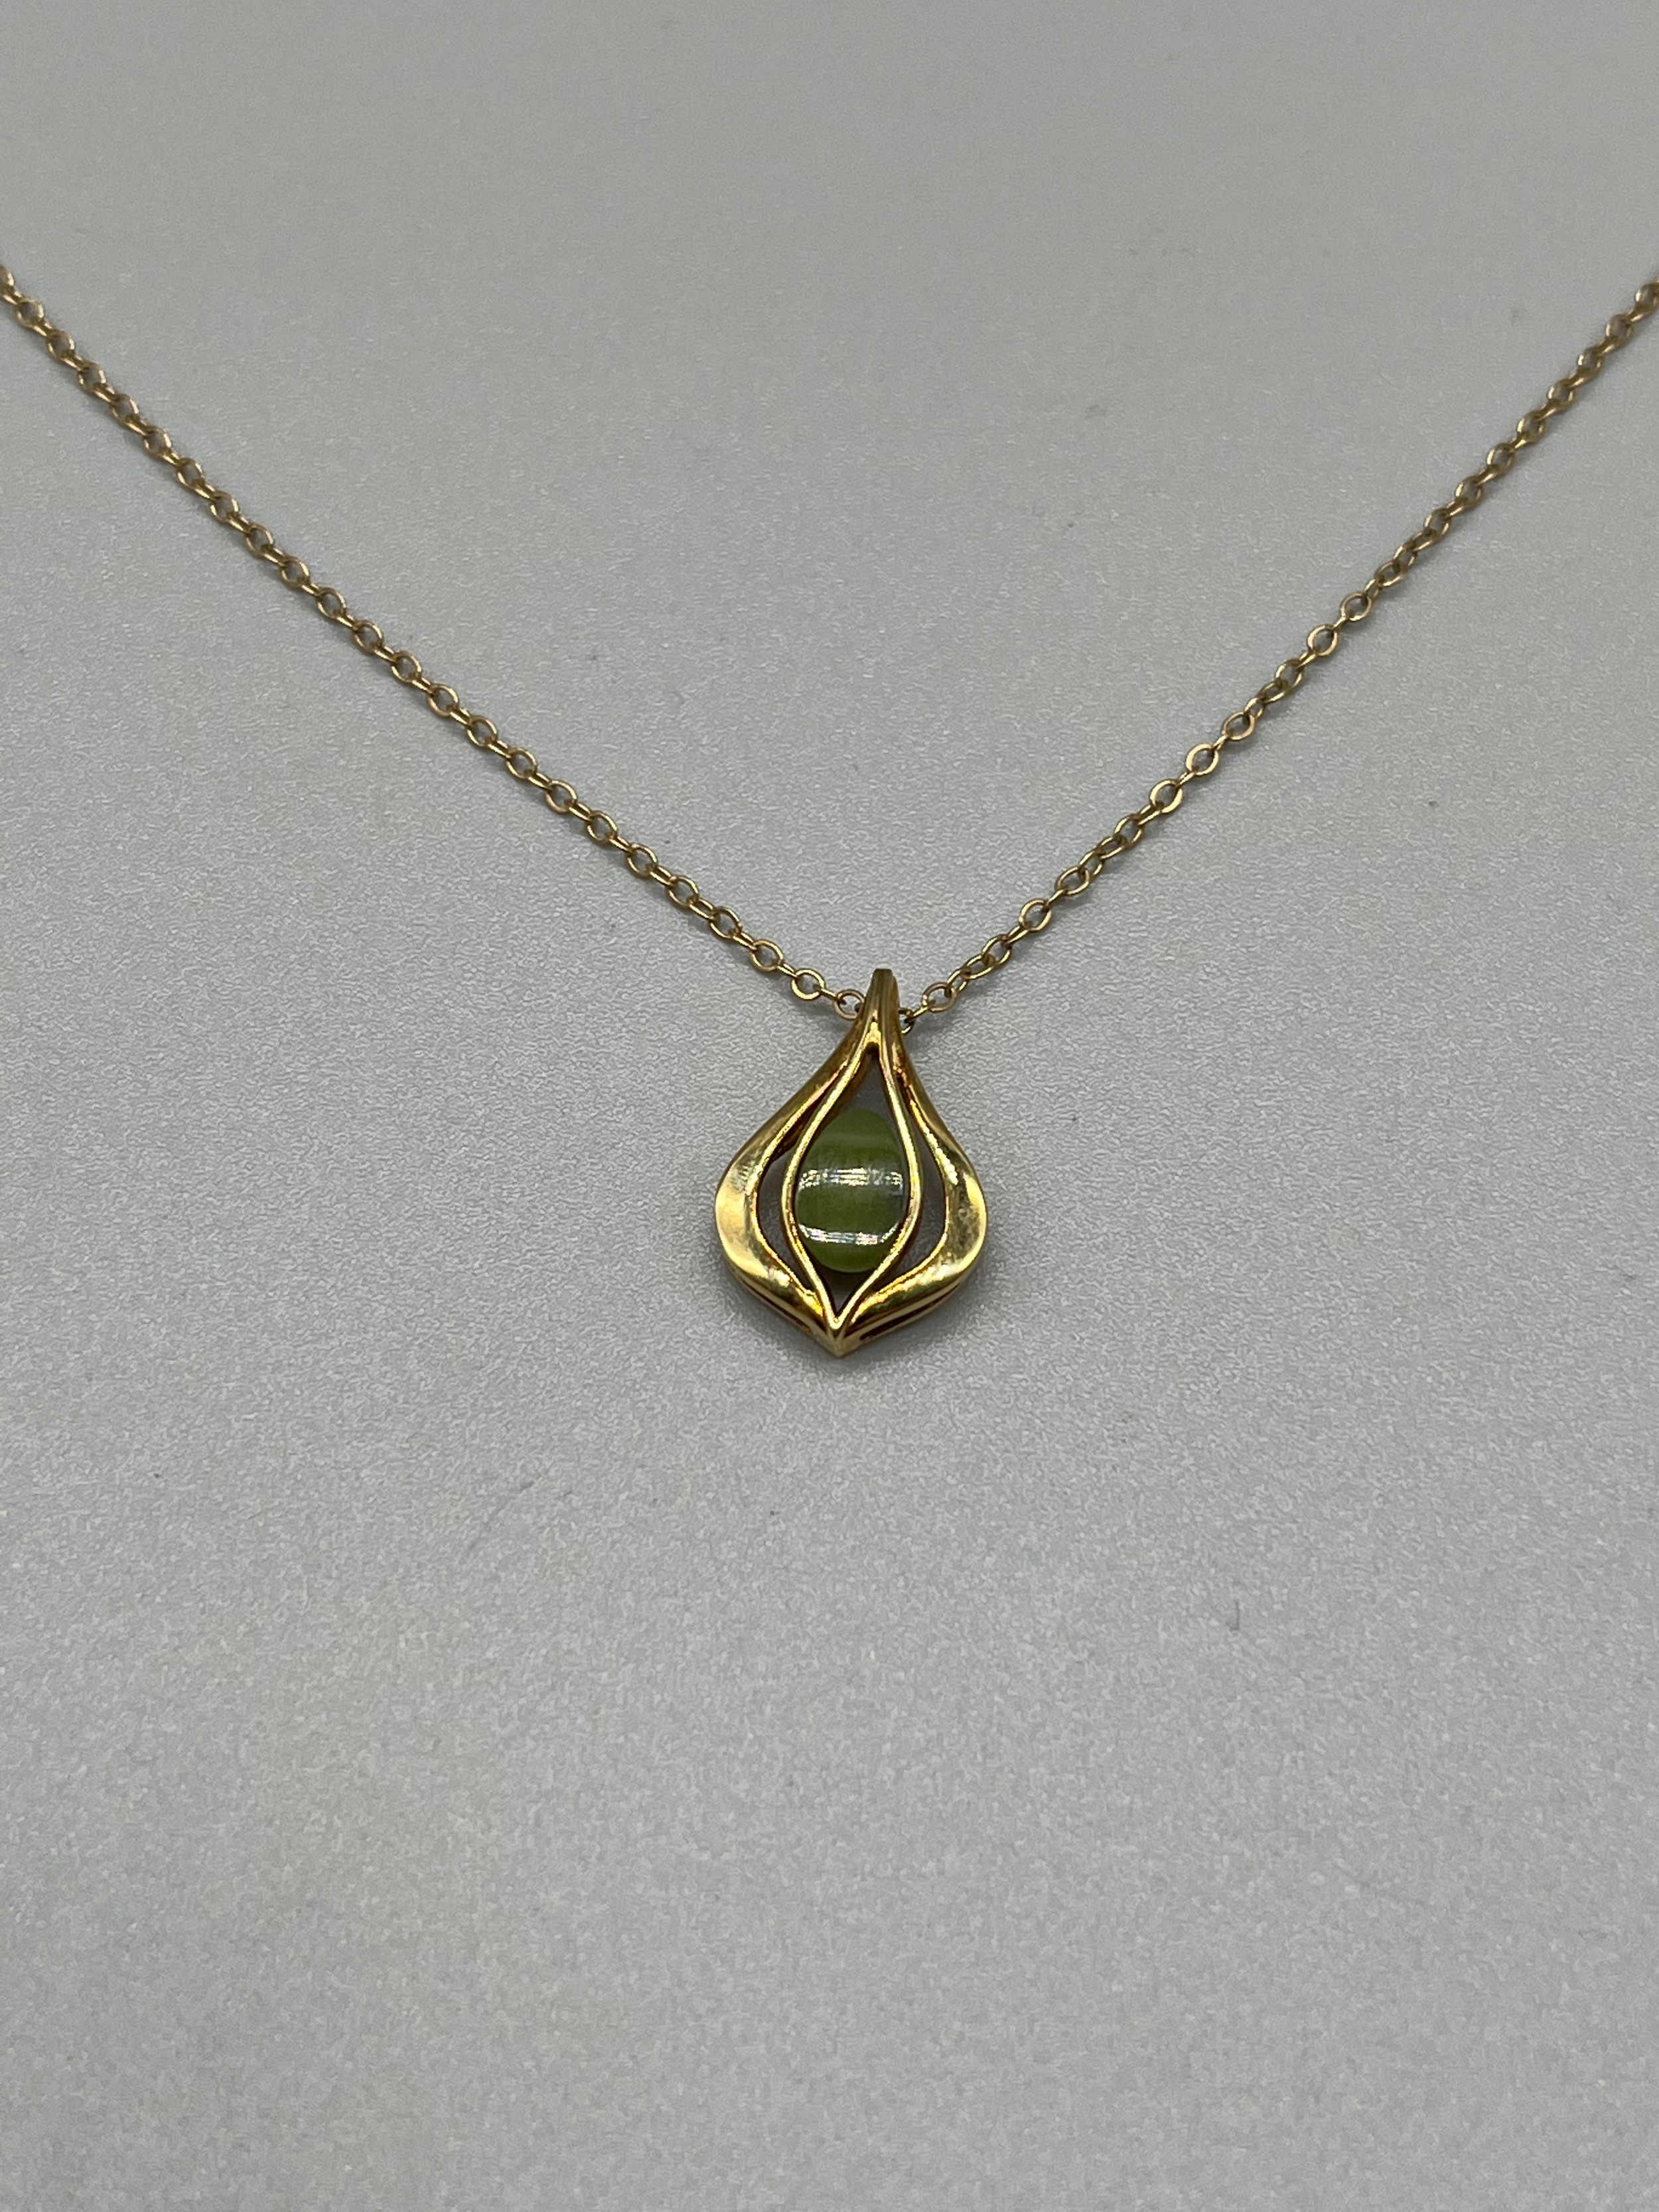 A 9ct gold pendant set with a jade stone and a 9ct gold necklace. [3.10grams]